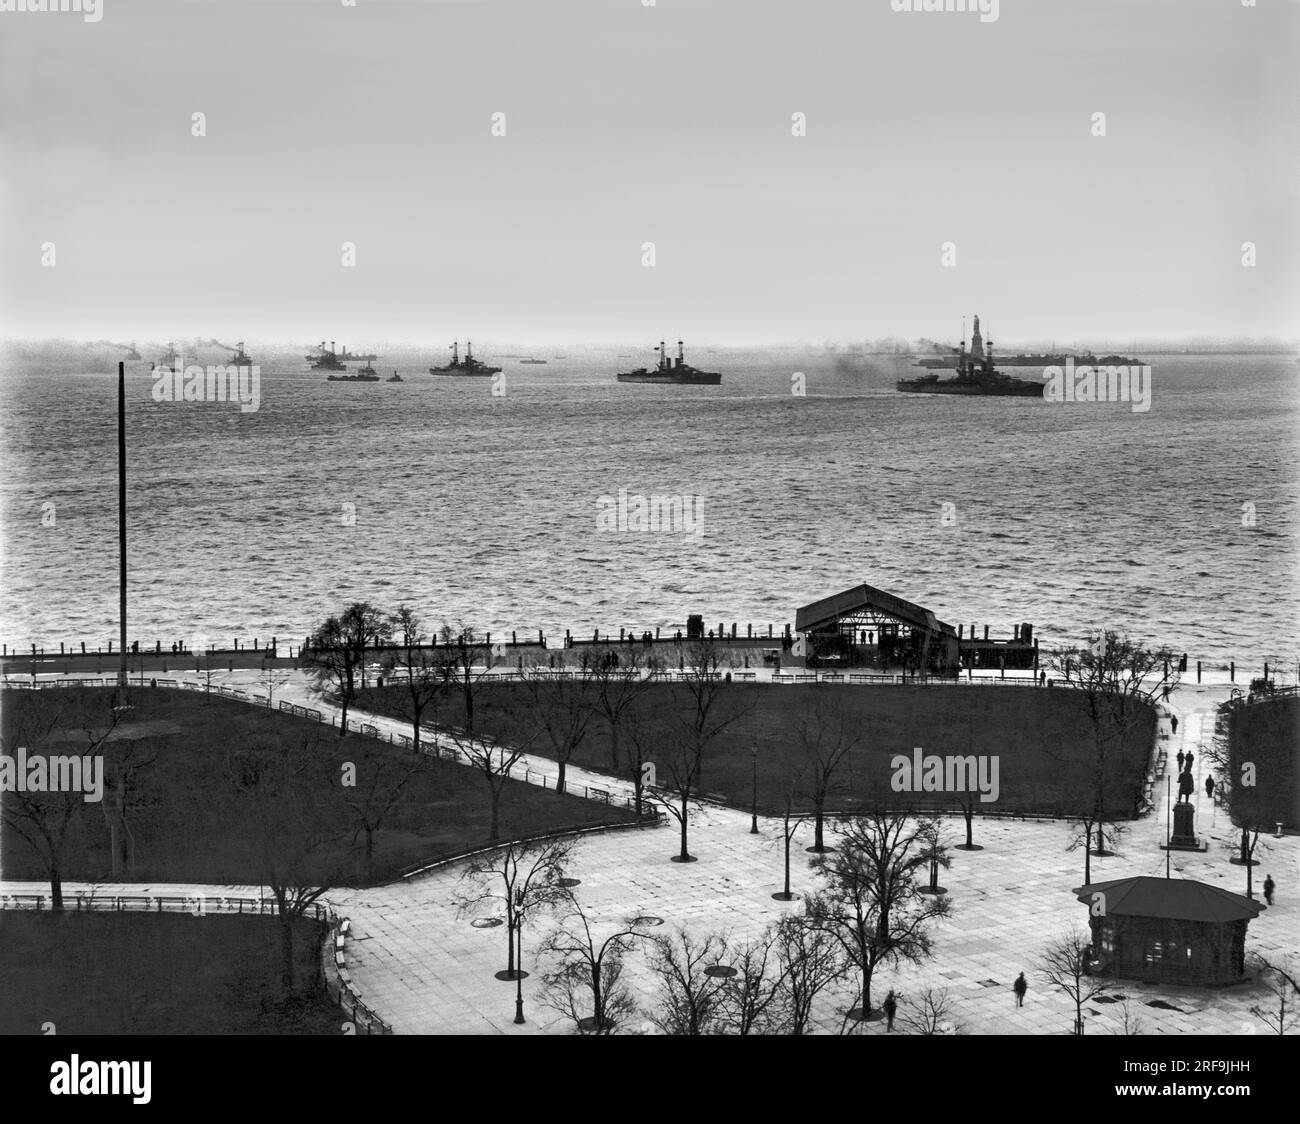 New York, New York:   November 24, 1916 The Navy fleet steaming up New York Bay past Battery Park at dusk so that the crews can root for Navy in the annual Army-Navy football game at the Polo grounds. The battleships arriving are the New York, Texas, Oklahoma, Connecticut, Florida, Utah, and Wyoming. Stock Photo